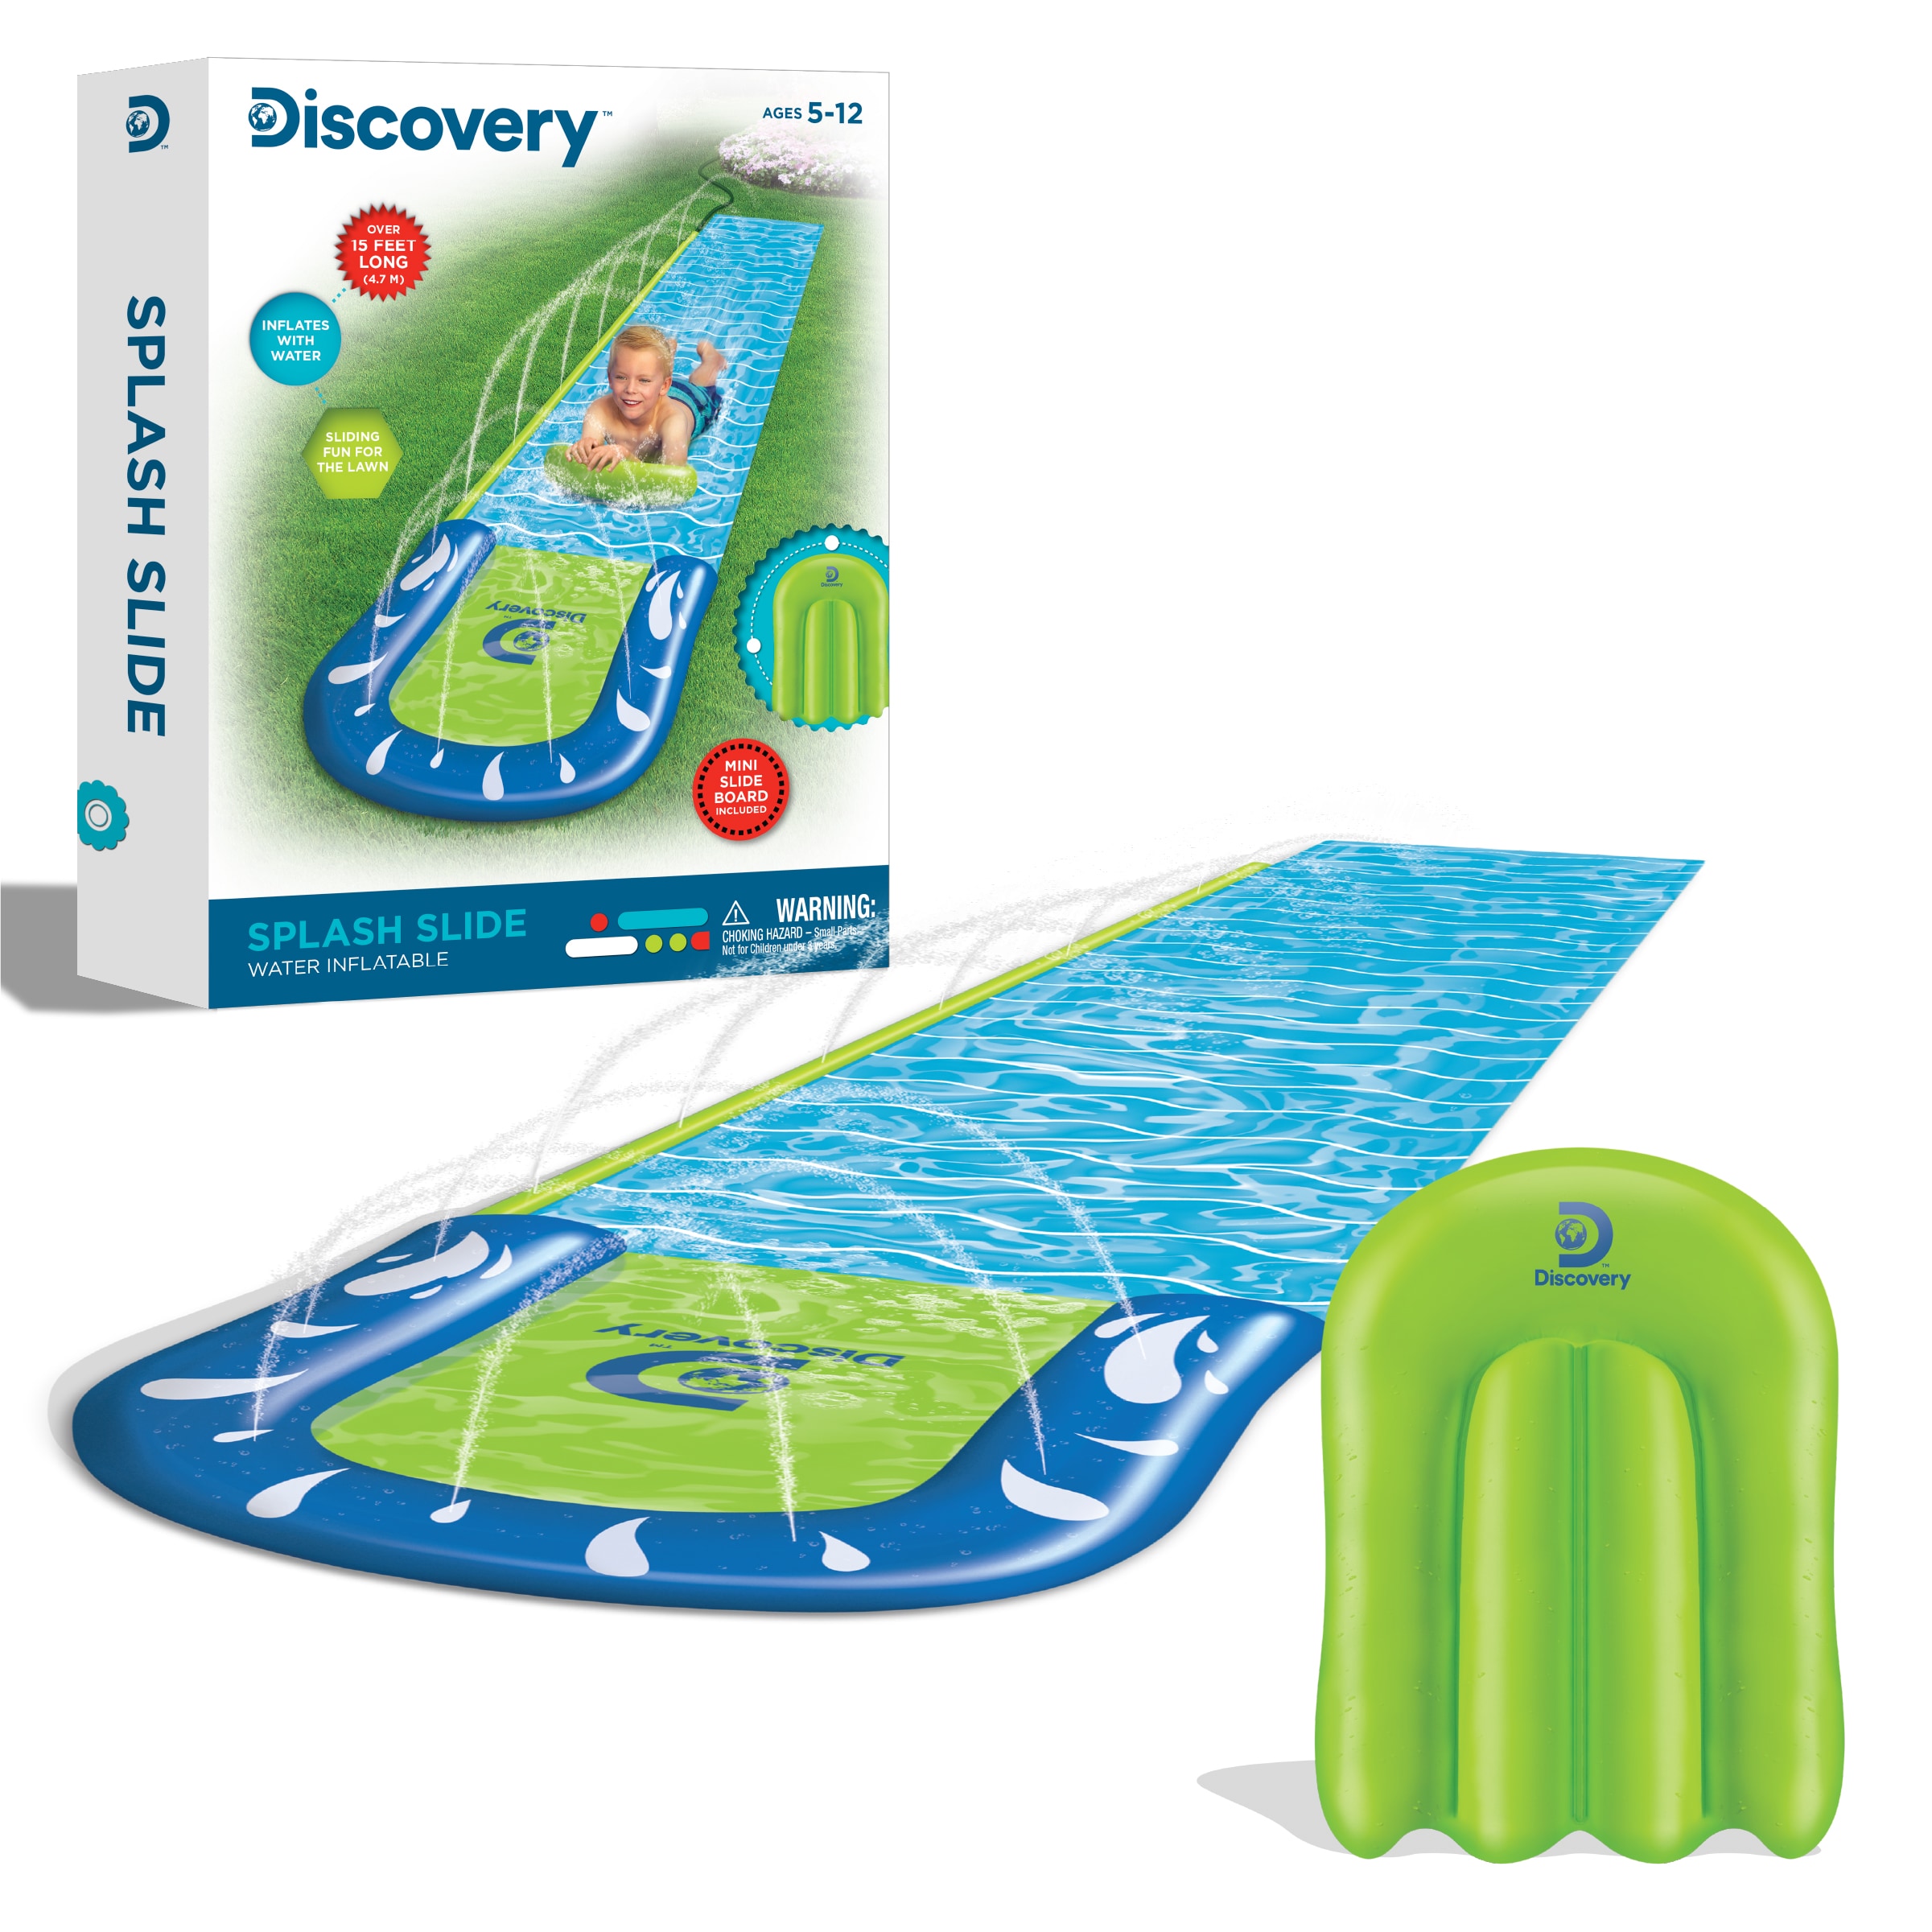 Ashley Furman Cusco Dood in de wereld Discovery Kids Outdoor Water Slide in the Party Games department at  Lowes.com